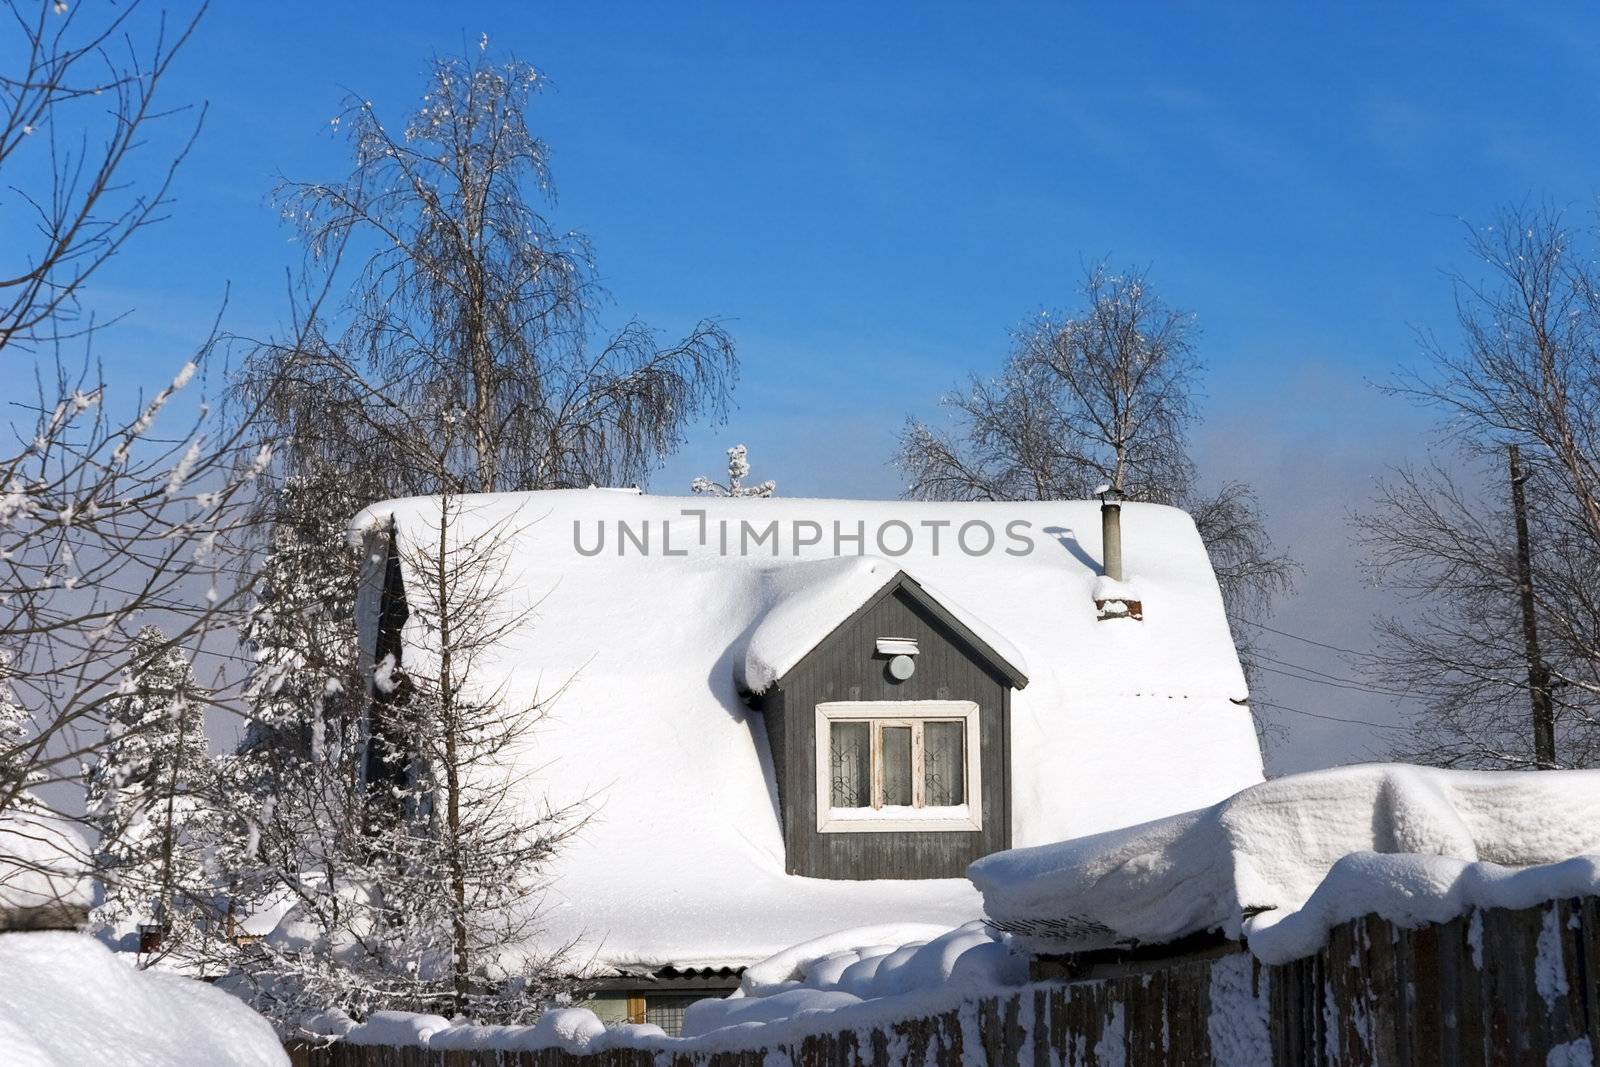 snow-covered roof of a village house on the background of bright blue sky